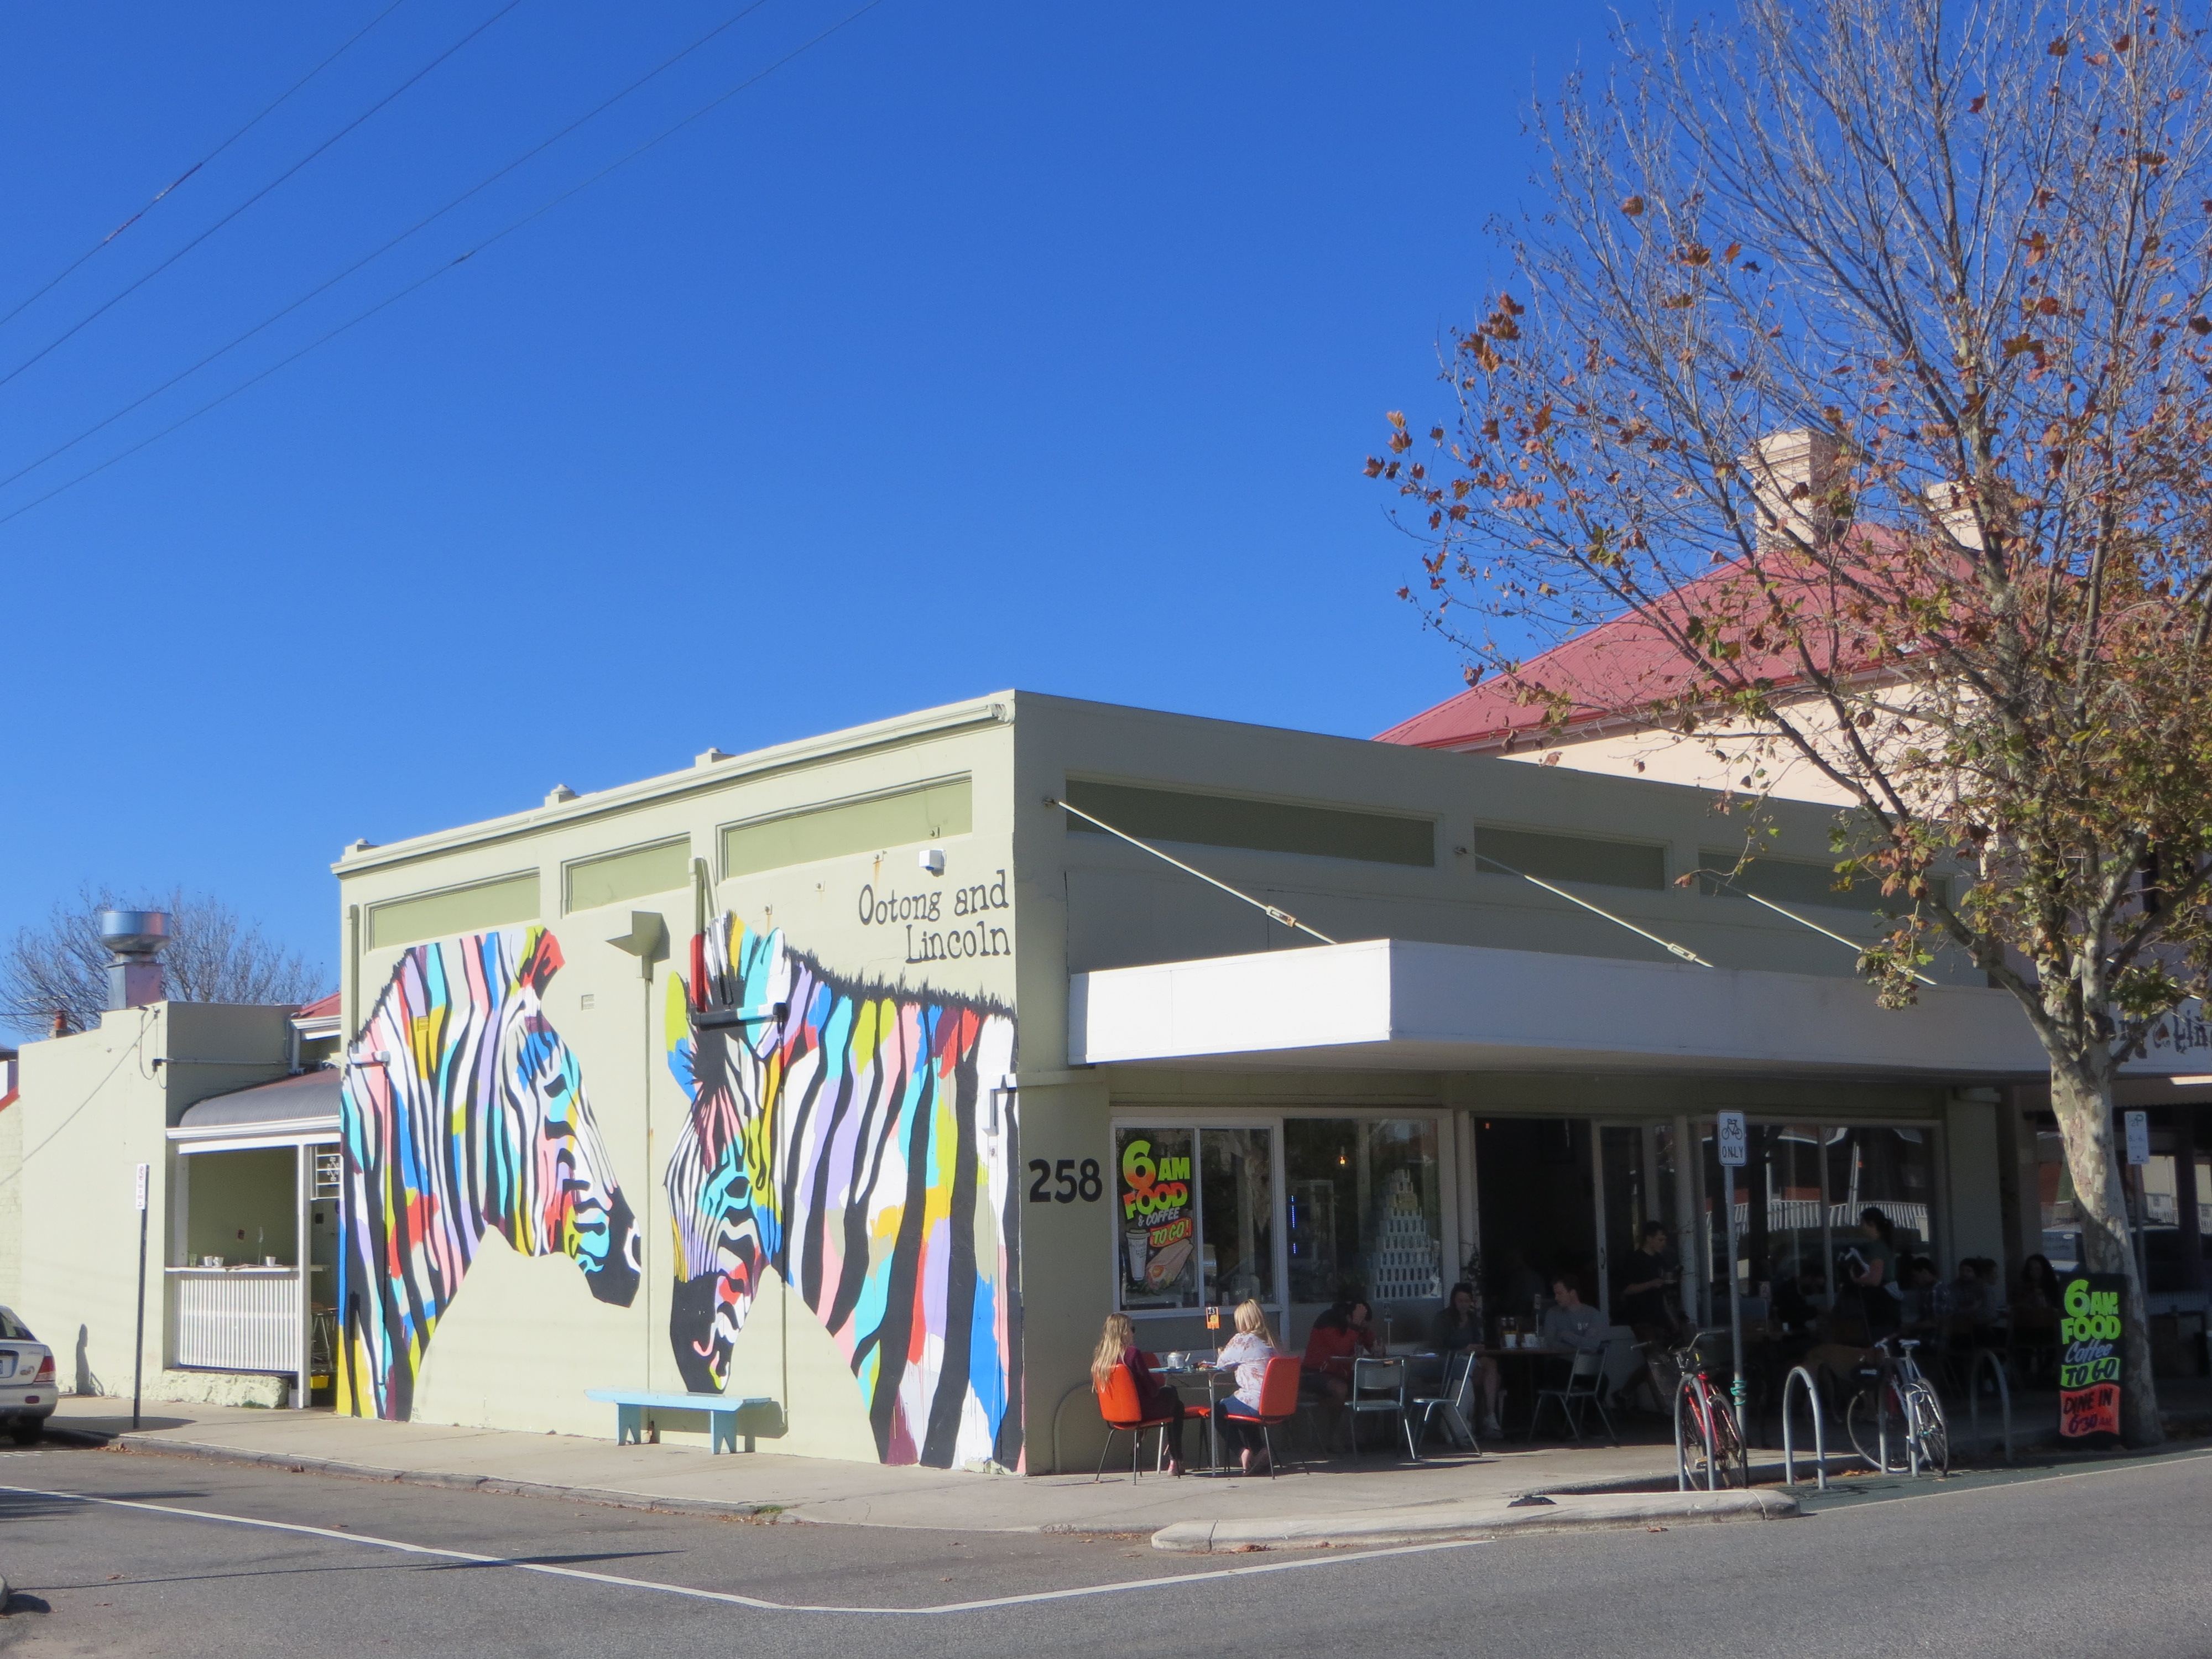 Ootong and Lincoln zebra art Freo